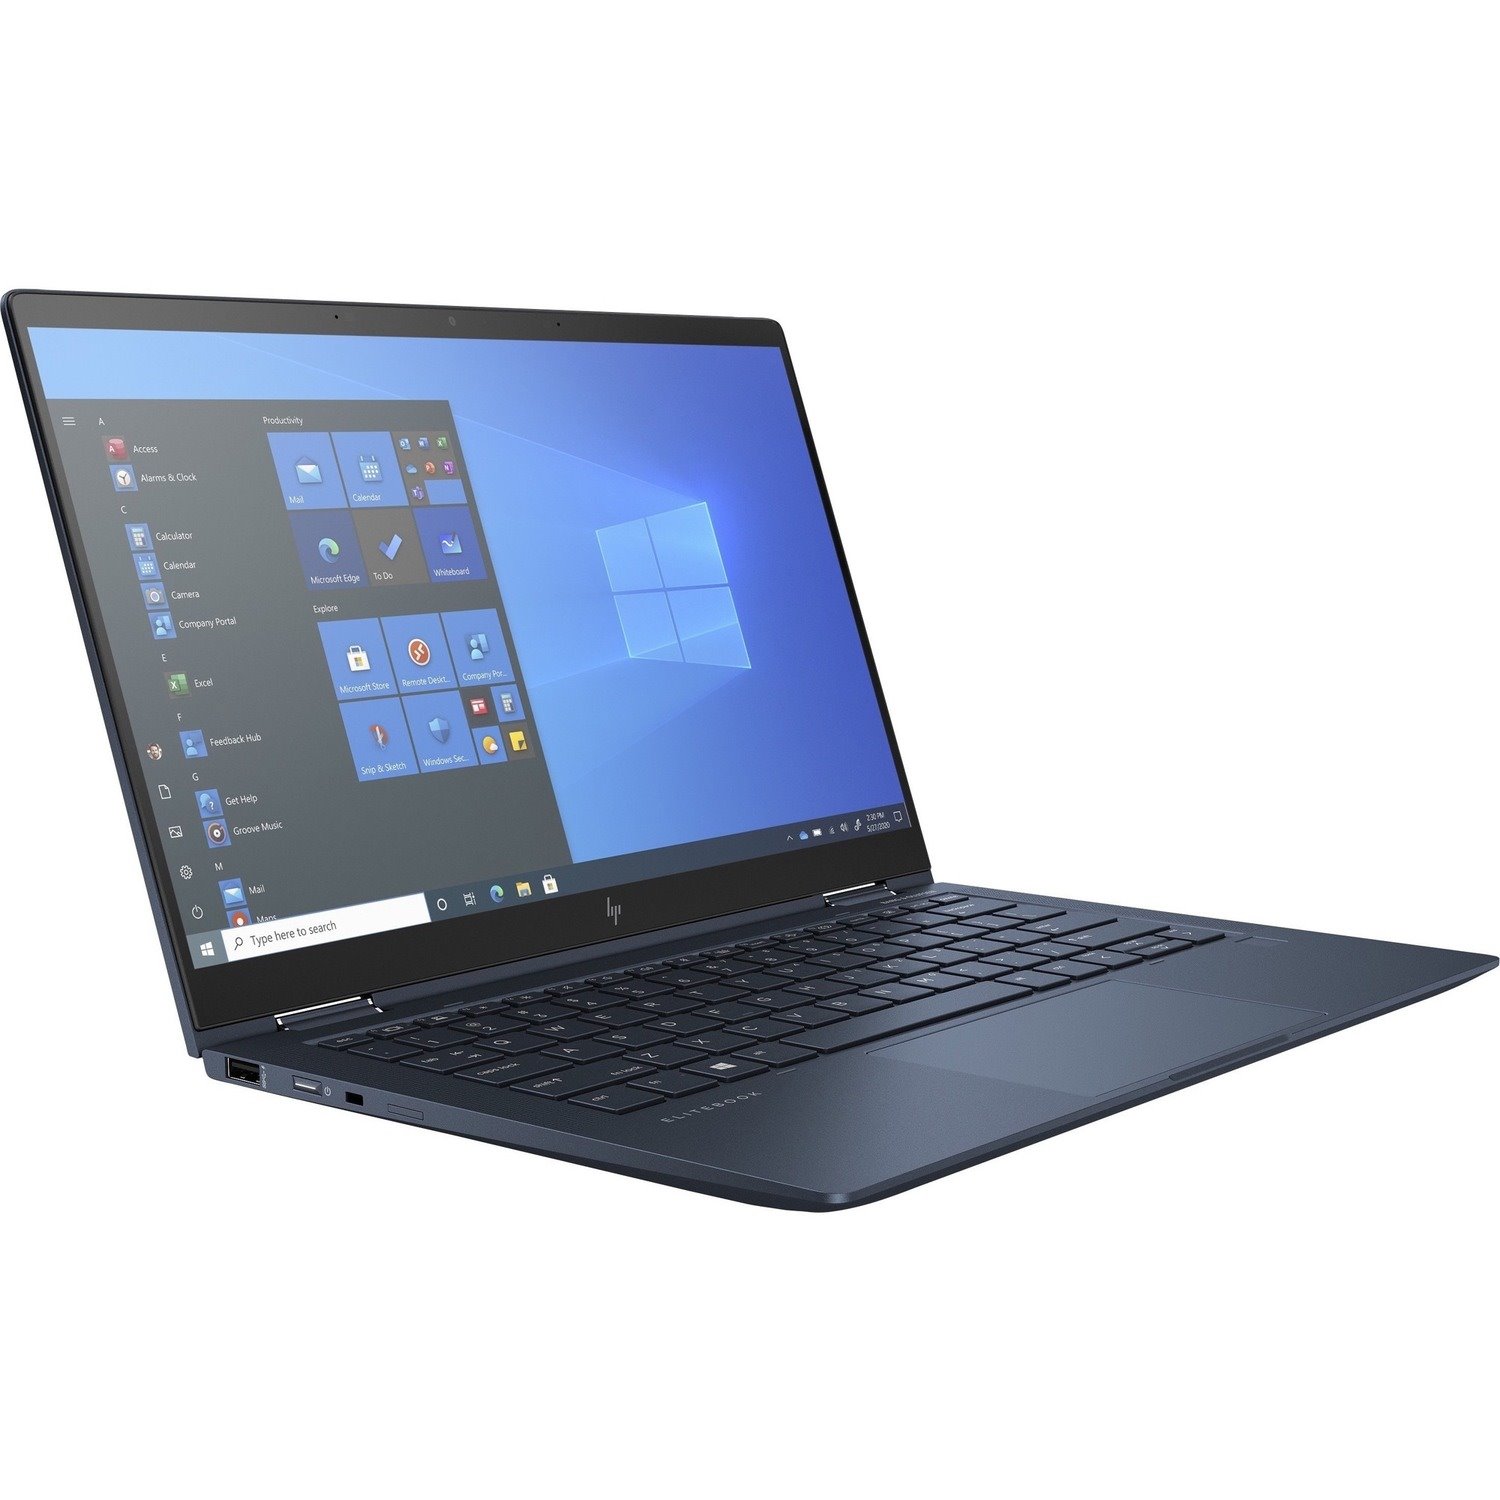 HP Elite Dragonfly G2 33.8 cm (13.3") Touchscreen Convertible 2 in 1 Notebook - Full HD - 1920 x 1080 - Intel Core i5 11th Gen i5-1145G7 Quad-core (4 Core) 2.60 GHz - 8 GB Total RAM - 512 GB SSD